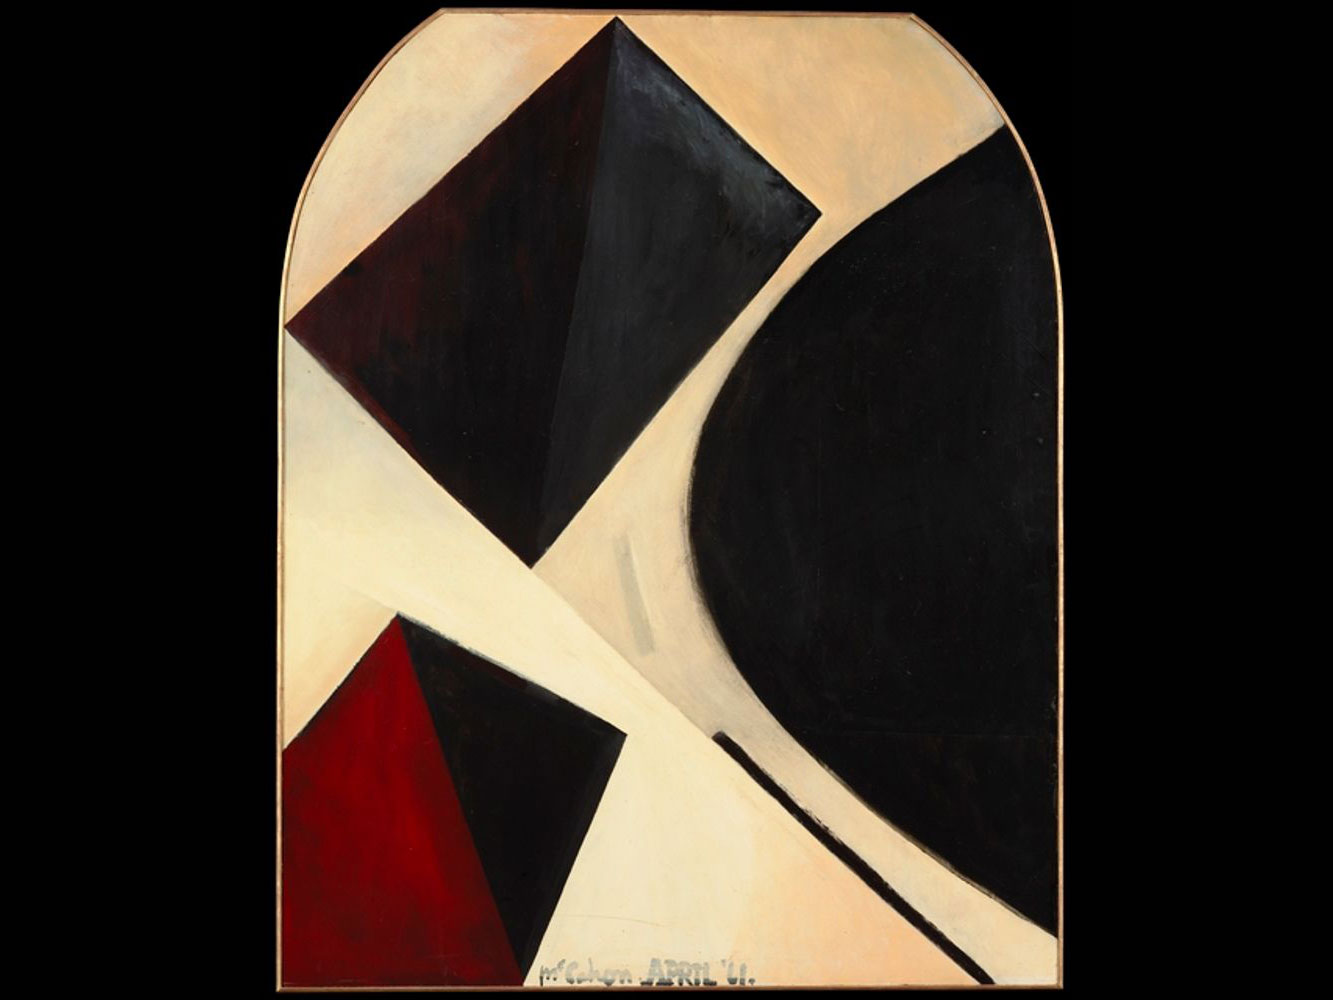 Geometric shaped in black, red, and beige